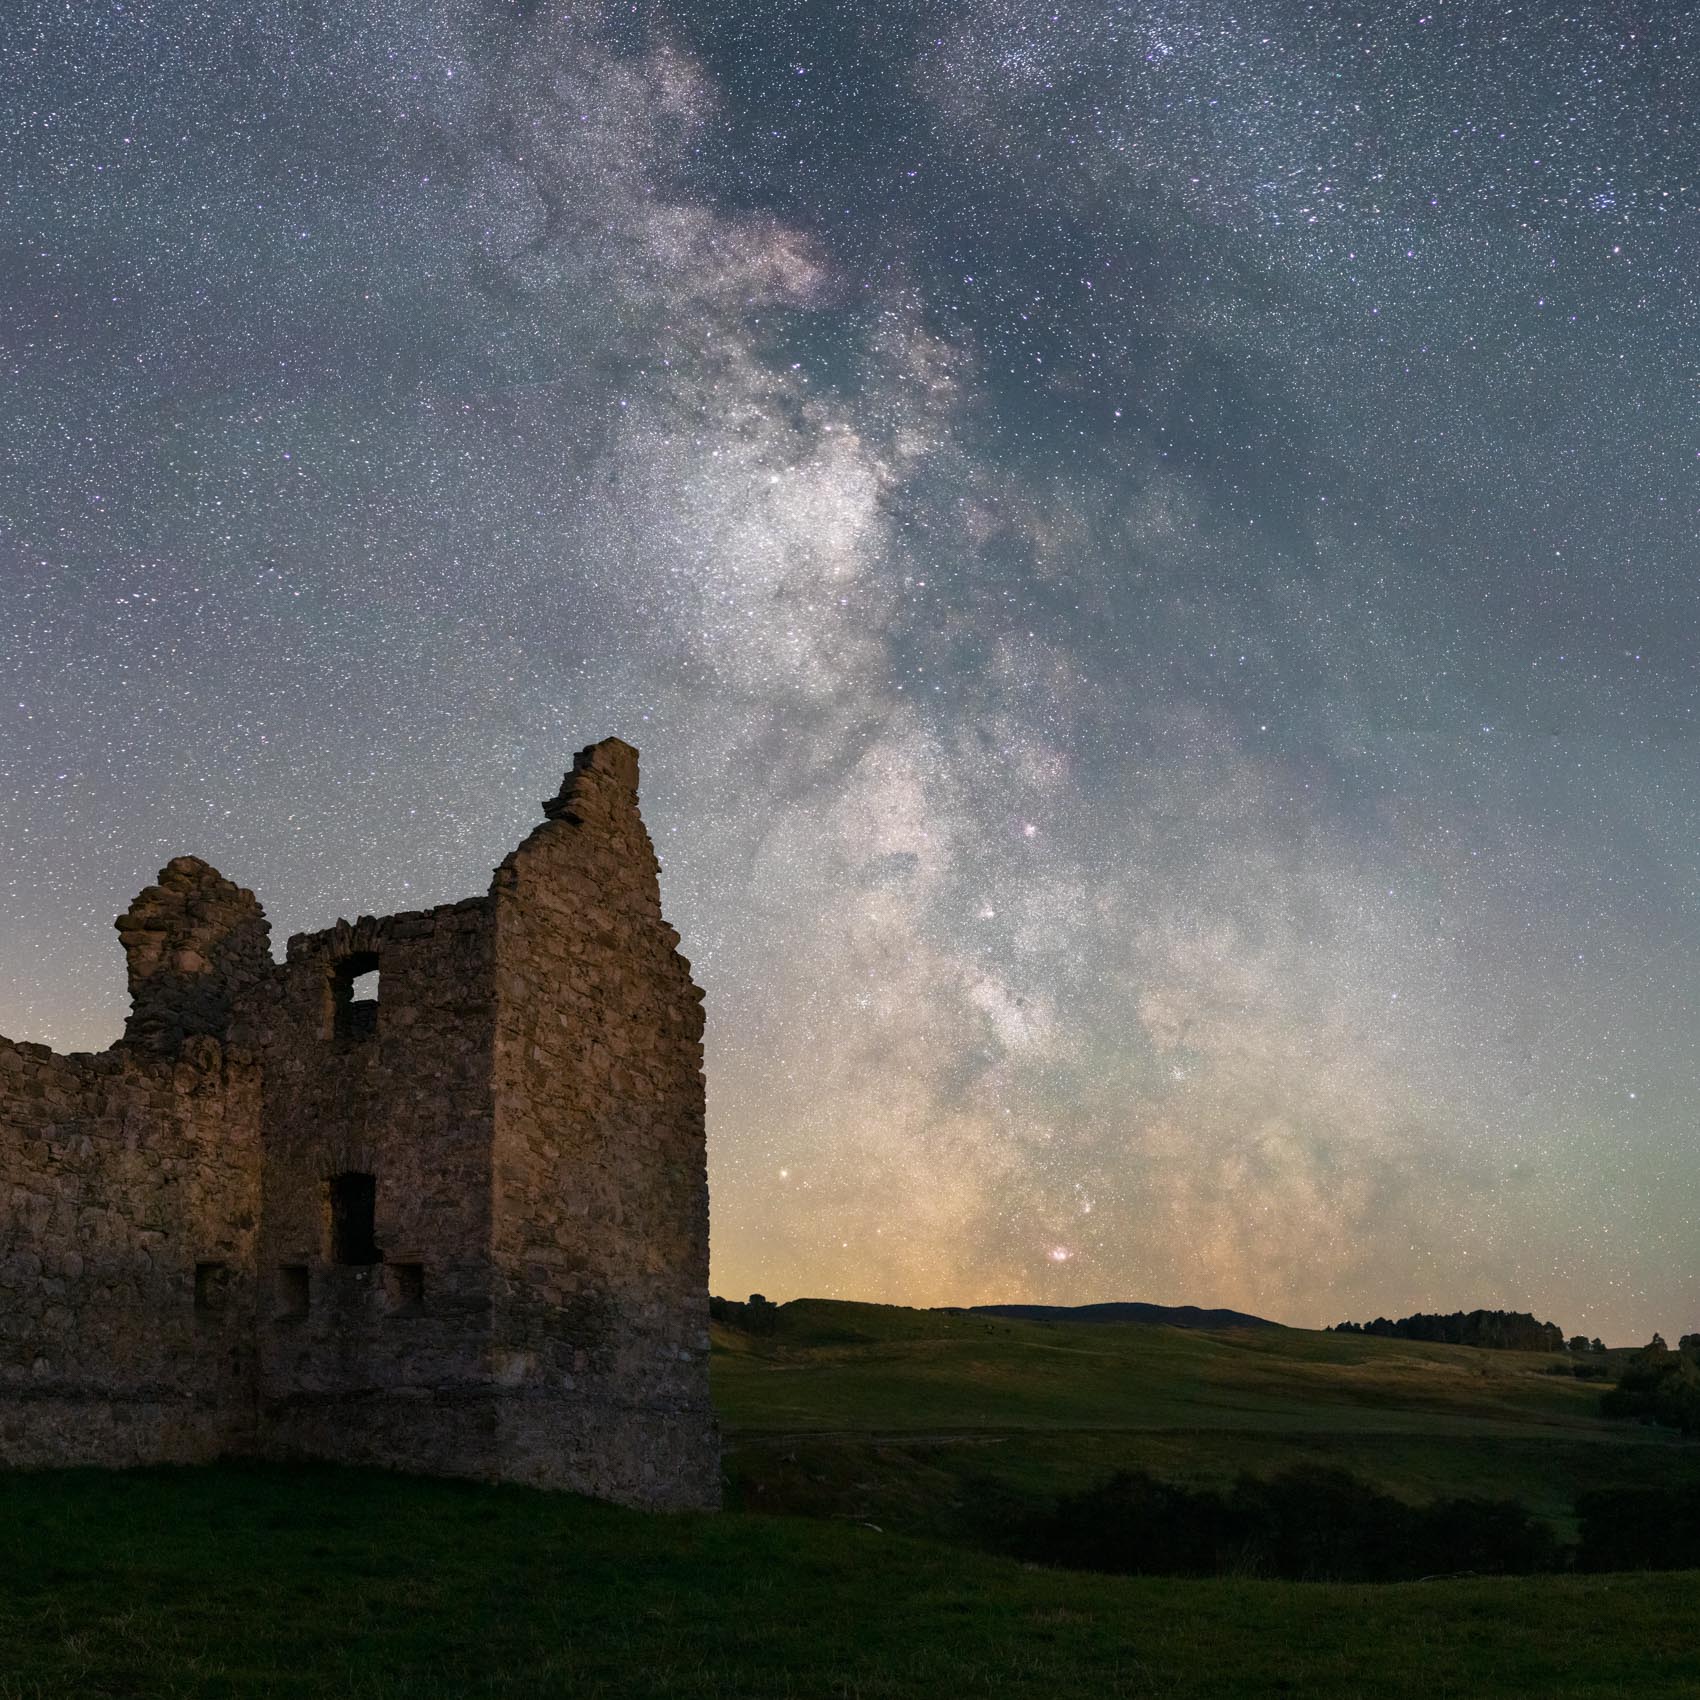 A 50mm panorama of the Galactic core region of the Milky Way, August 2022.